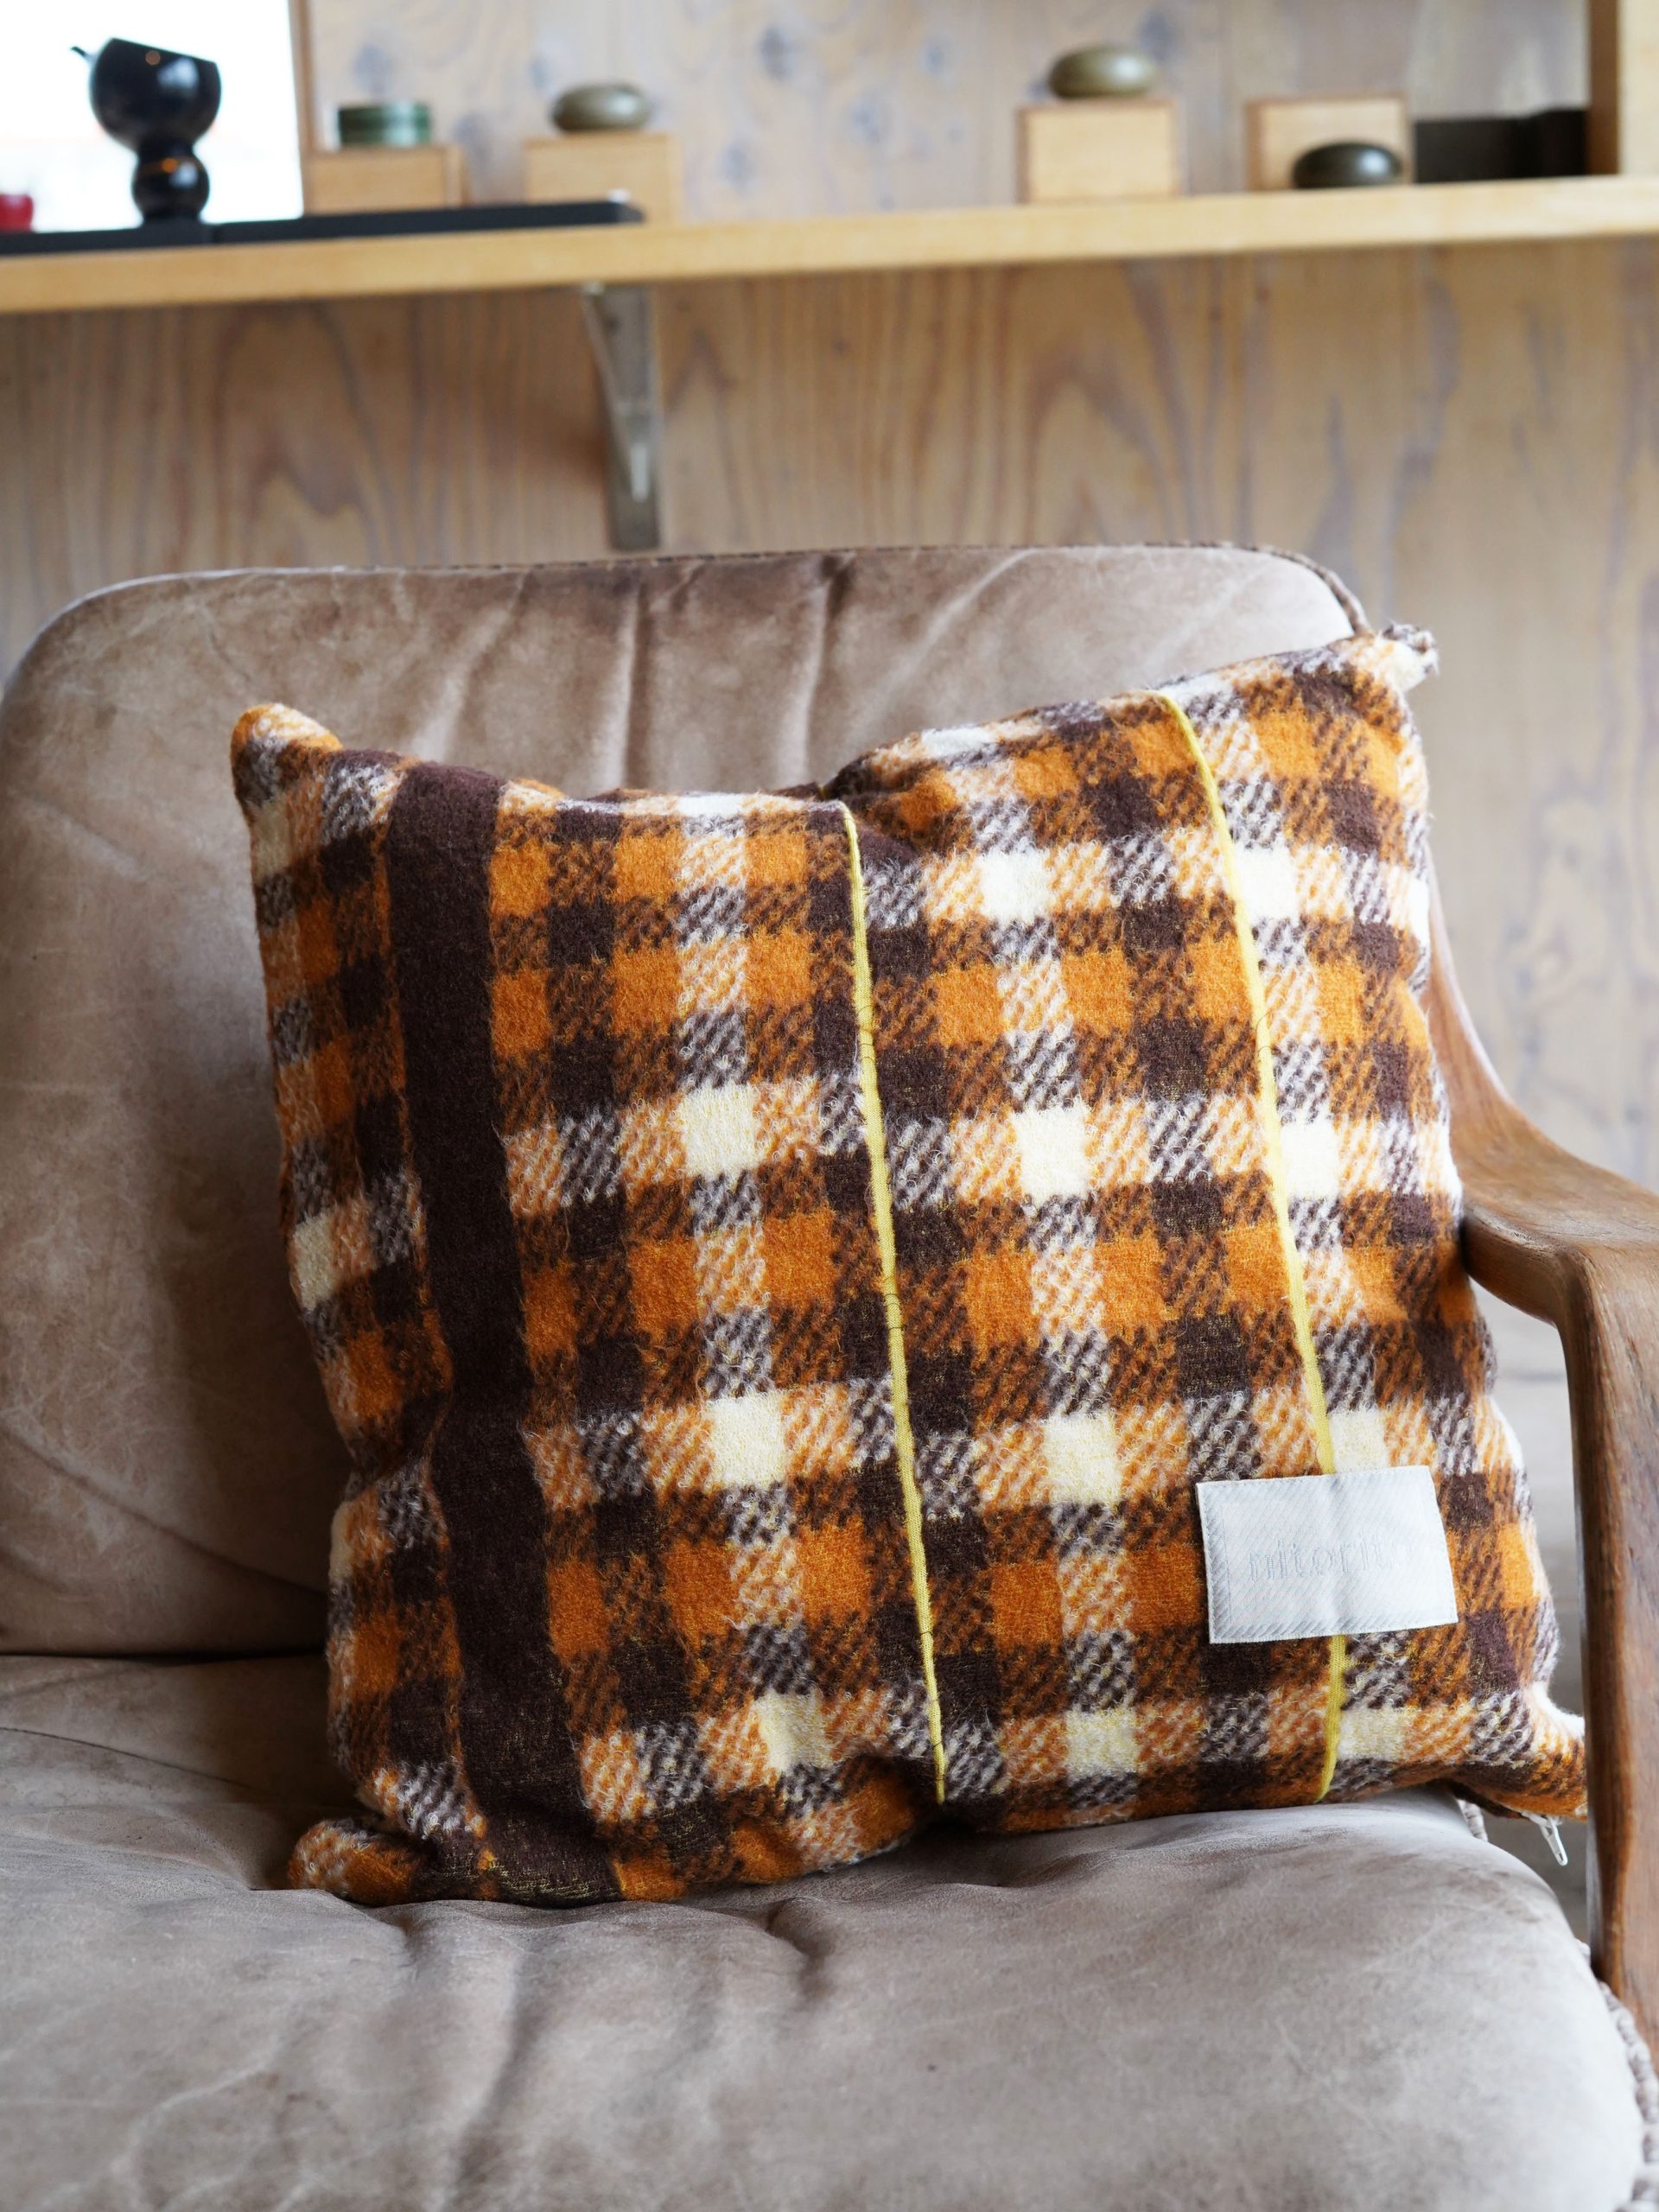 Cushion Cover (gift_brown)